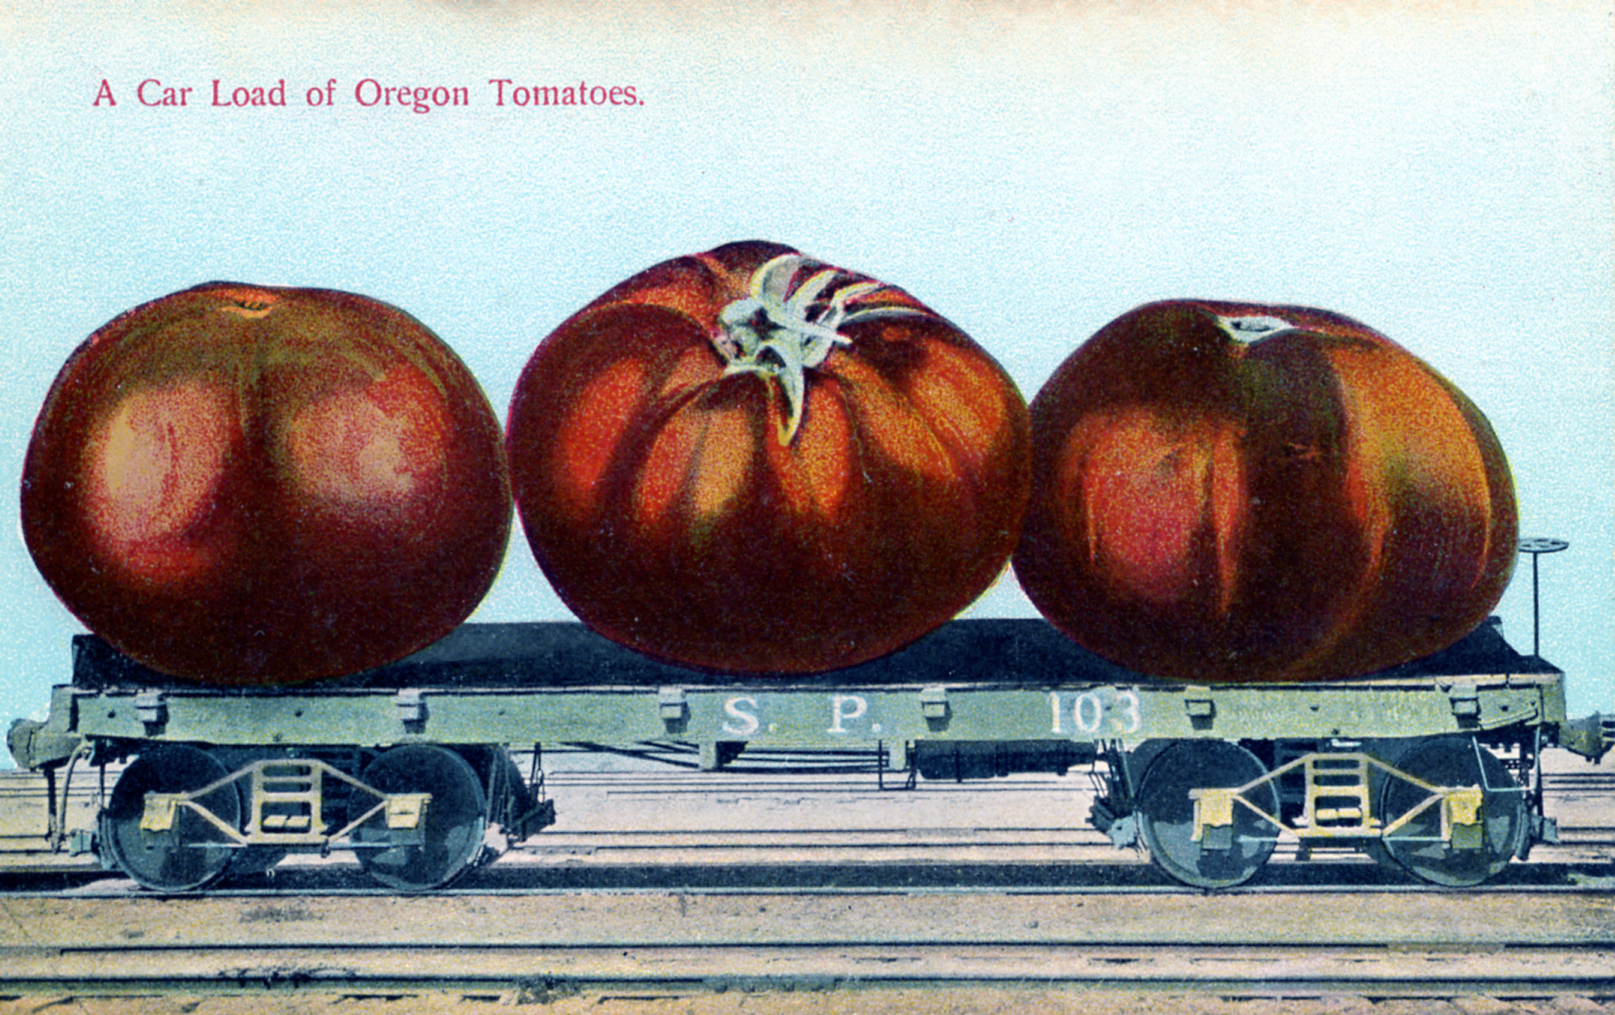 Car Load of Oregon Tomatoes OR Southern Pacific Pacific Novelty Publishers, San Francisco, Cal. Printed in Germany